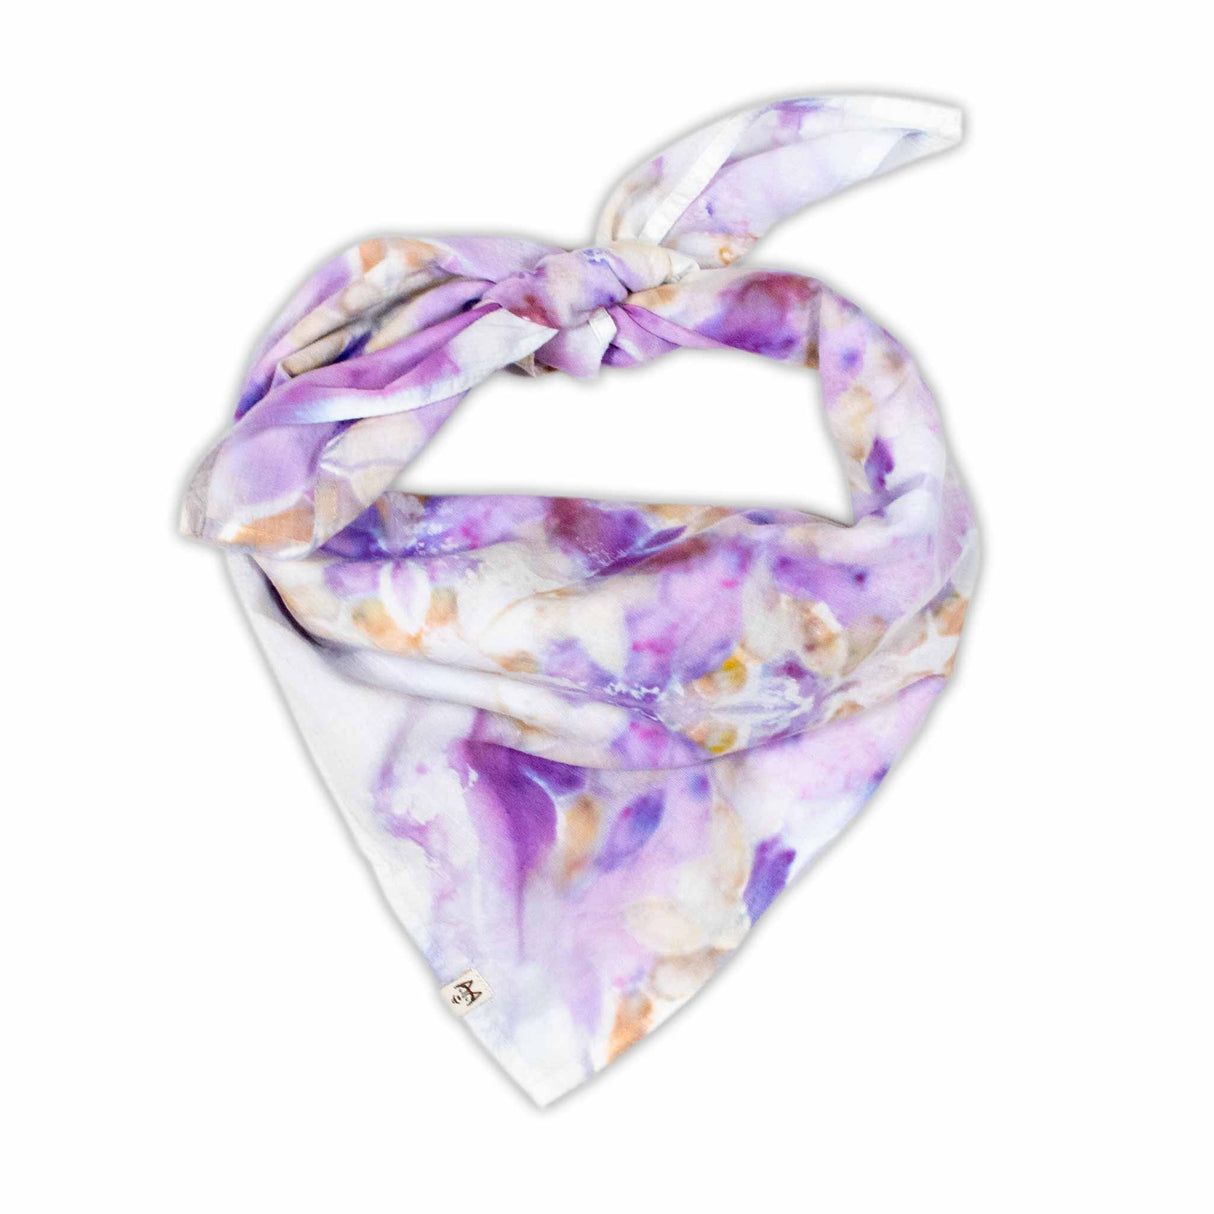 Handcrafted tie-dye bandana with a vibrant display of purple hues and white areas that symmetrically bloom into a pattern reminiscent of flowers and mandalas.